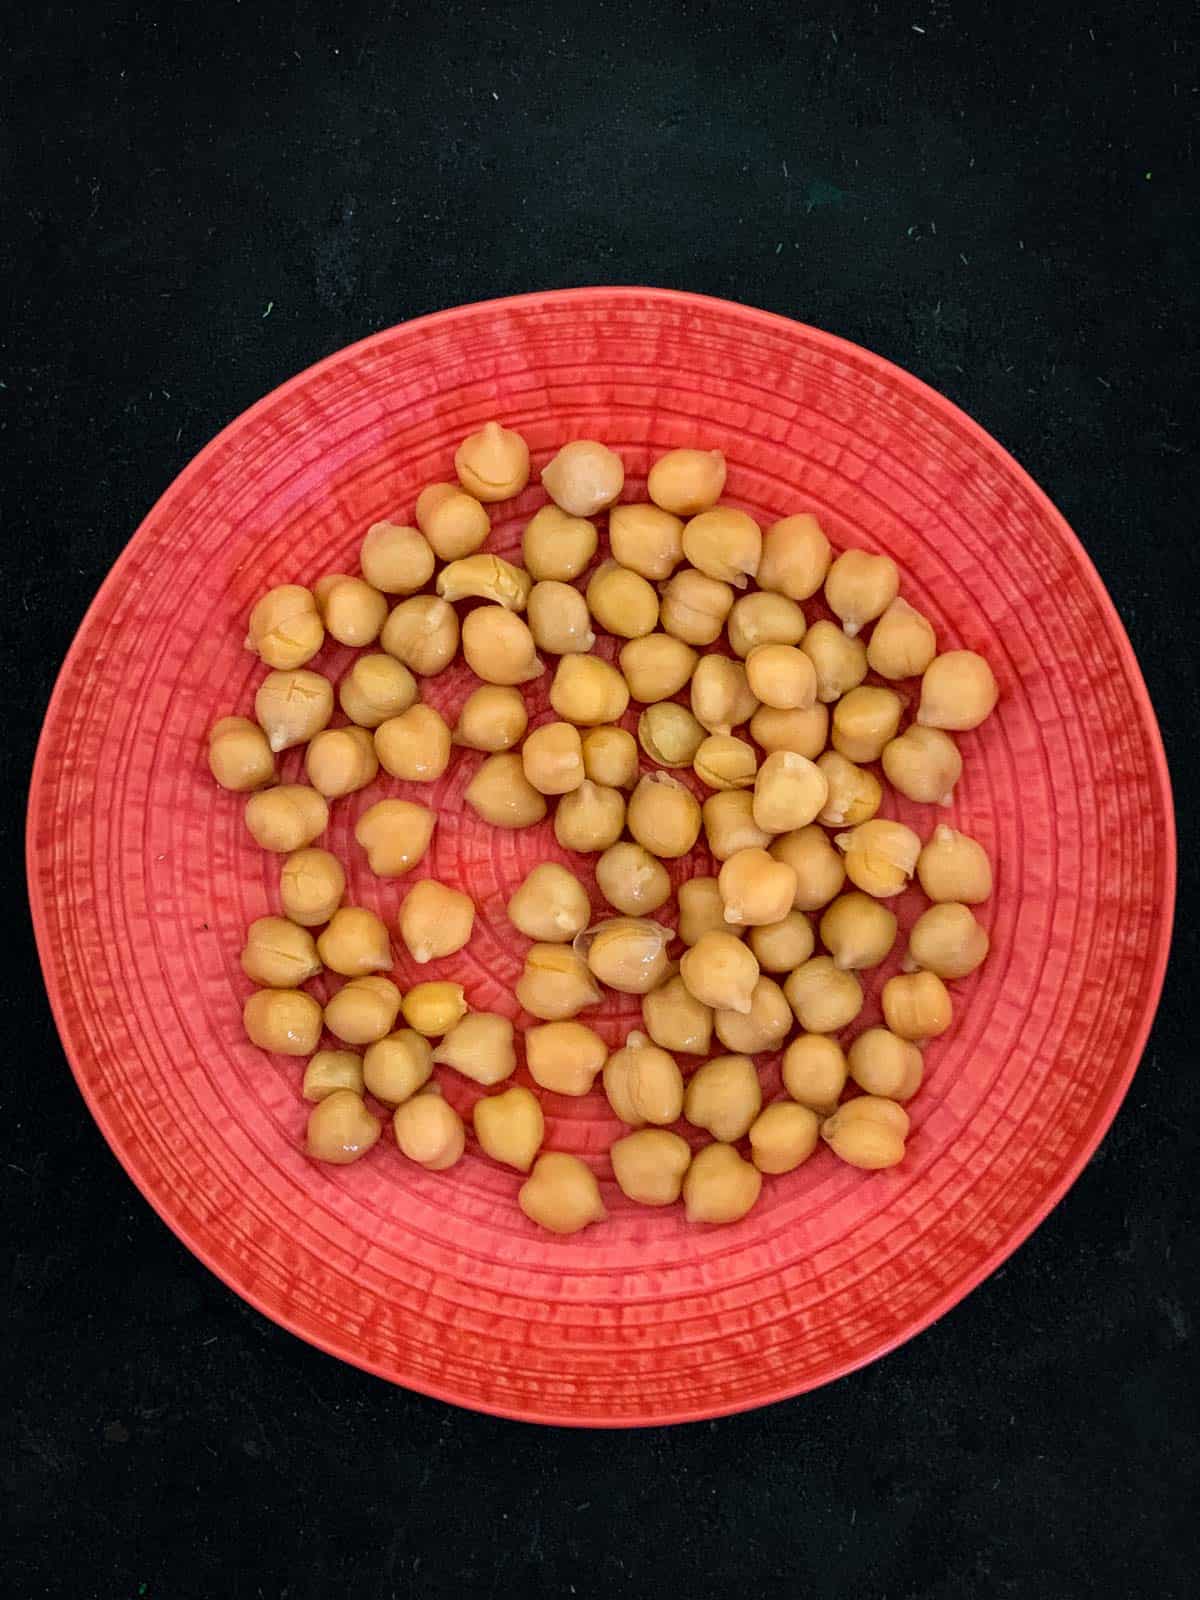 Chickpeas on a tangerine coloured plate